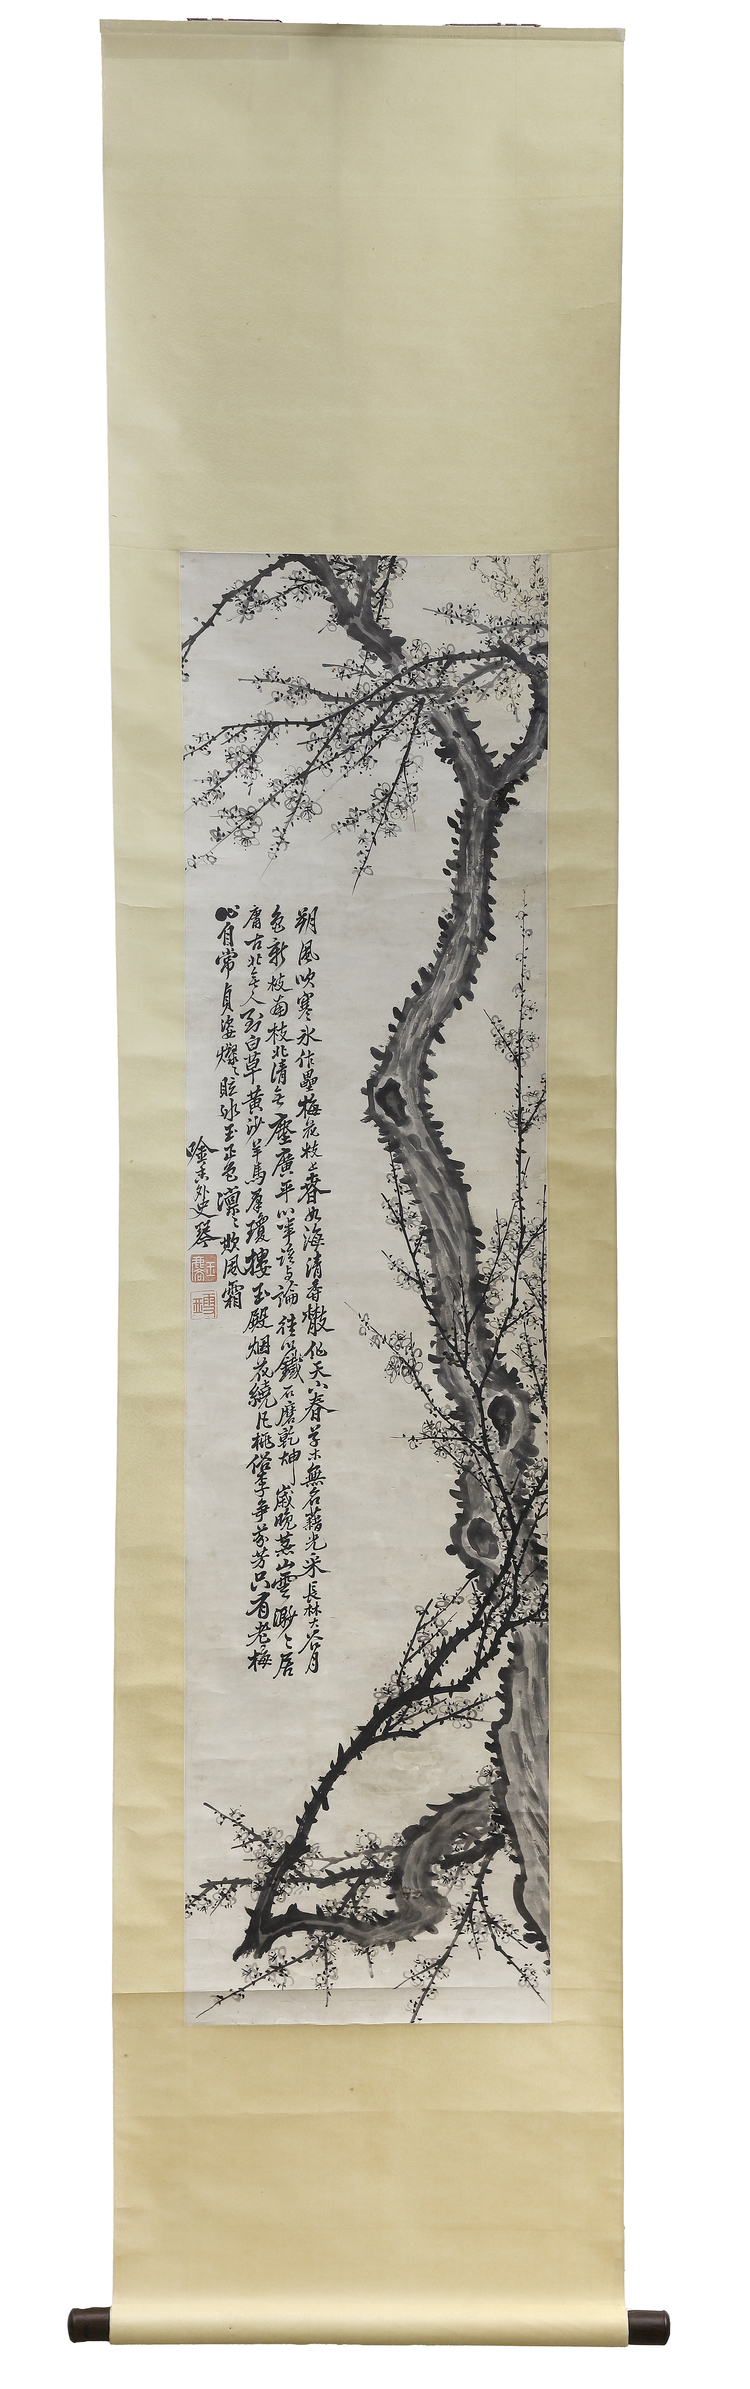 A CHINESE' PRUNUS' HANGING SCROLL, 19TH-20TH CENTURY